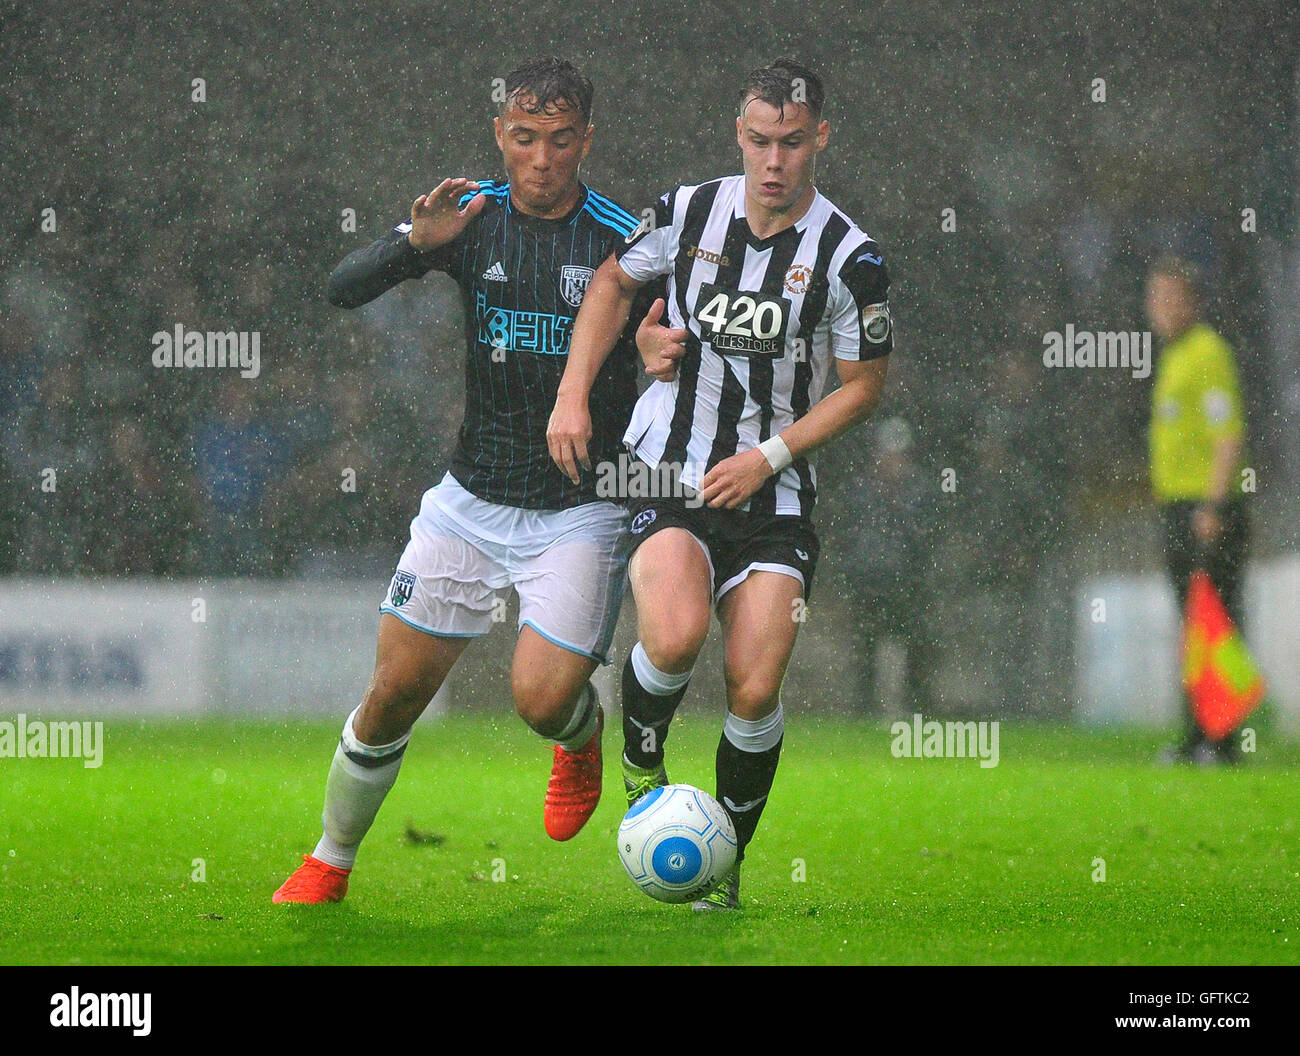 West Bromwich Albion's Kane Wilson (left) and Torquay United's San Chaney during the pre-season friendly match at Plainmoor, Torquay. Stock Photo